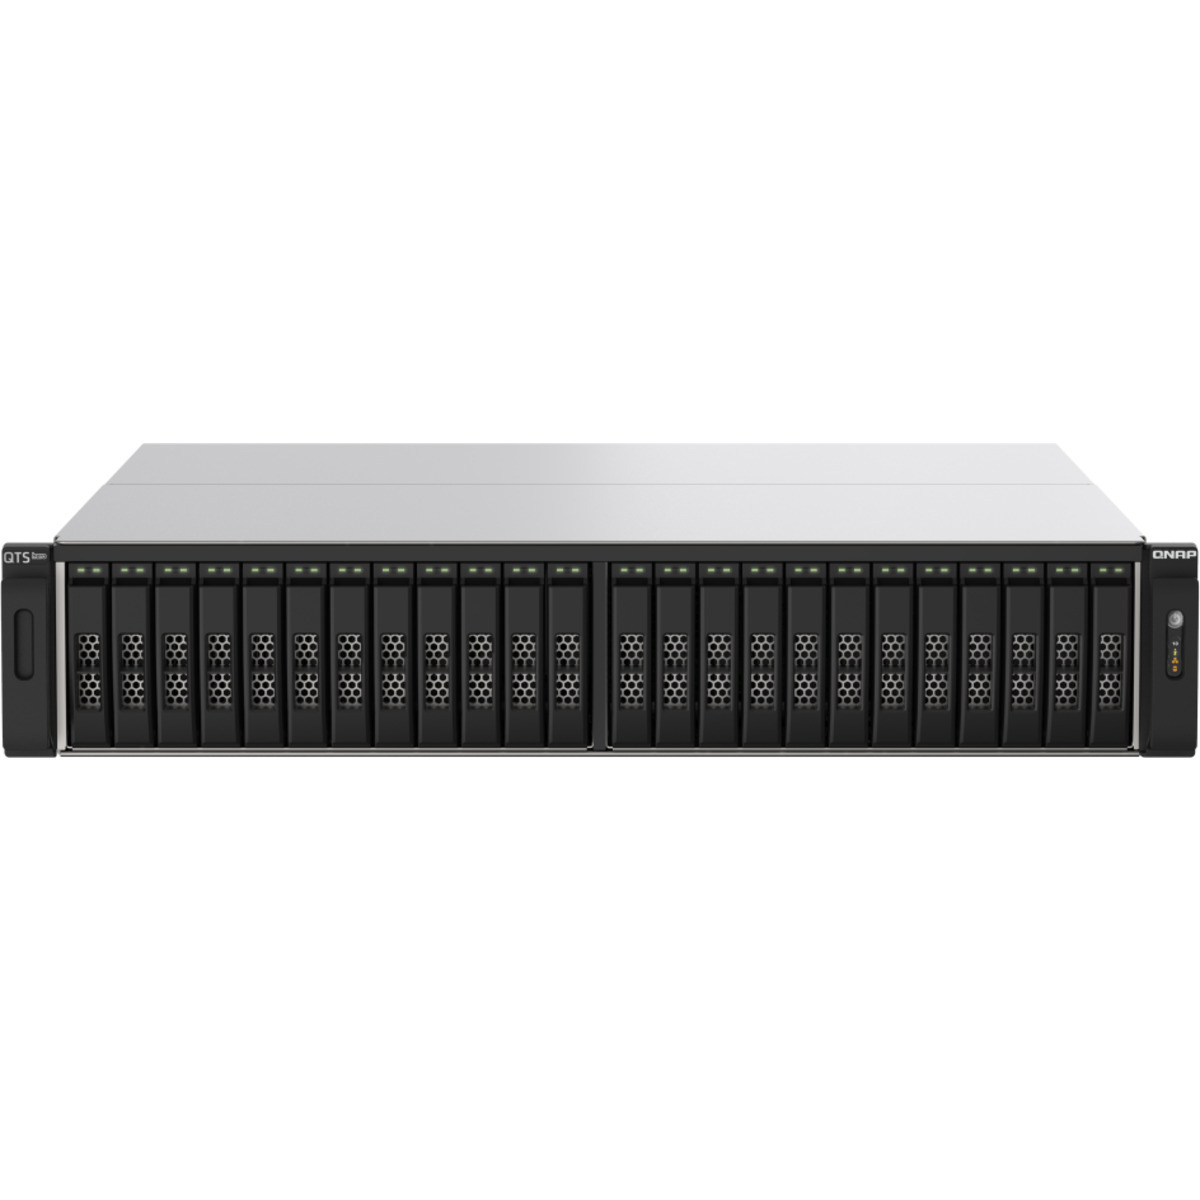 QNAP TS-h2490FU-7302P 9.5tb 24-Bay RackMount Large Business / Enterprise NAS - Network Attached Storage Device 19x500gb Sabrent Rocket 4 Plus SB-RKT4P-500  7000/3700MB/s M.2 2280 NVMe SSD CONSUMER Class Drives Installed - Burn-In Tested TS-h2490FU-7302P